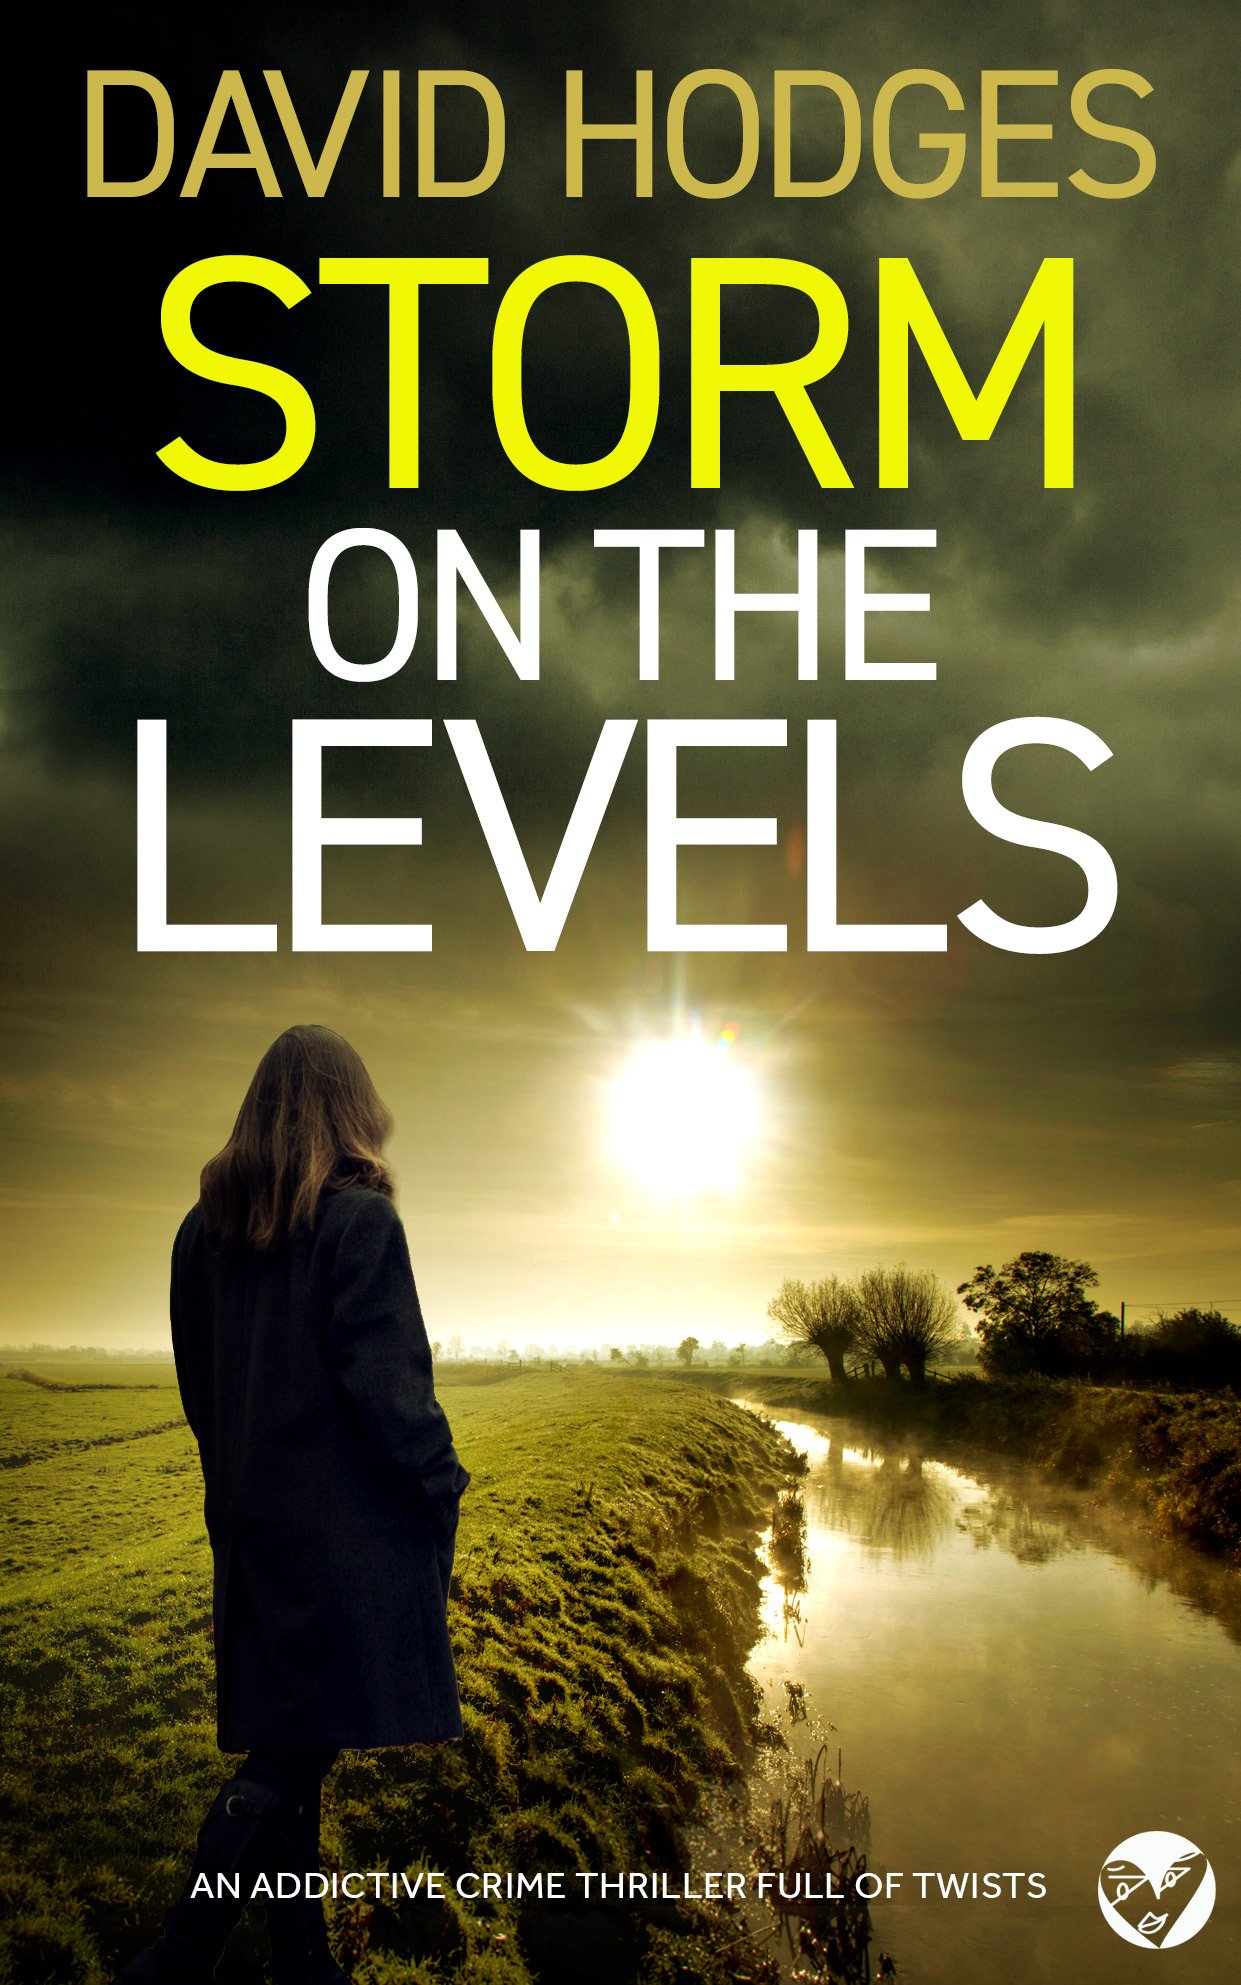 STORM ON THE LEVELS Cover publish 622KB.jpg